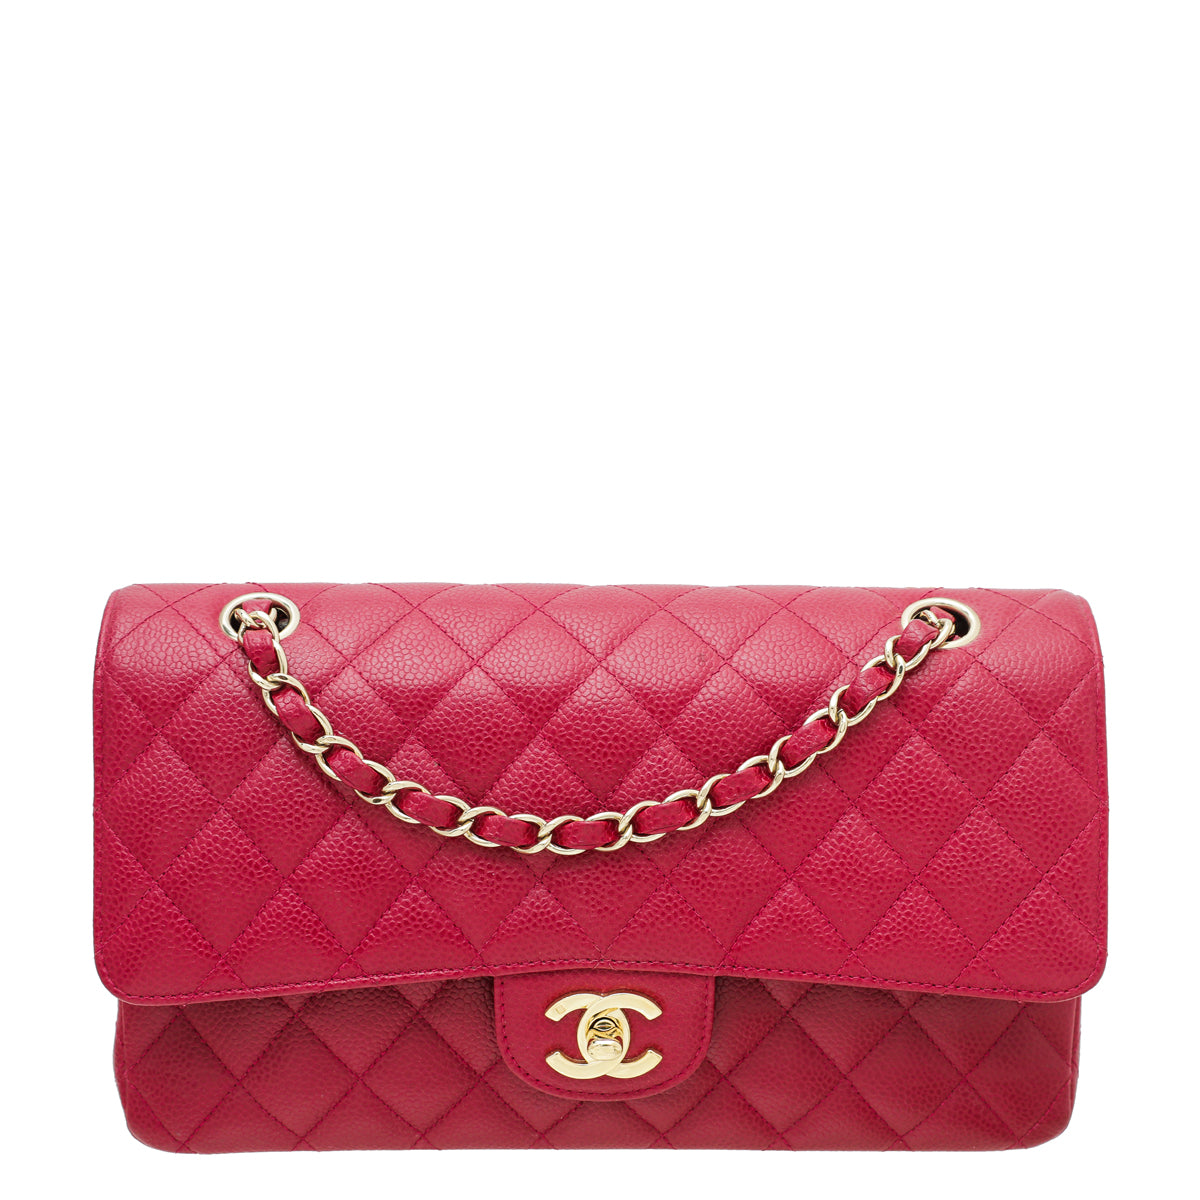 Chanel Red Classic Double Flap Medium Bag